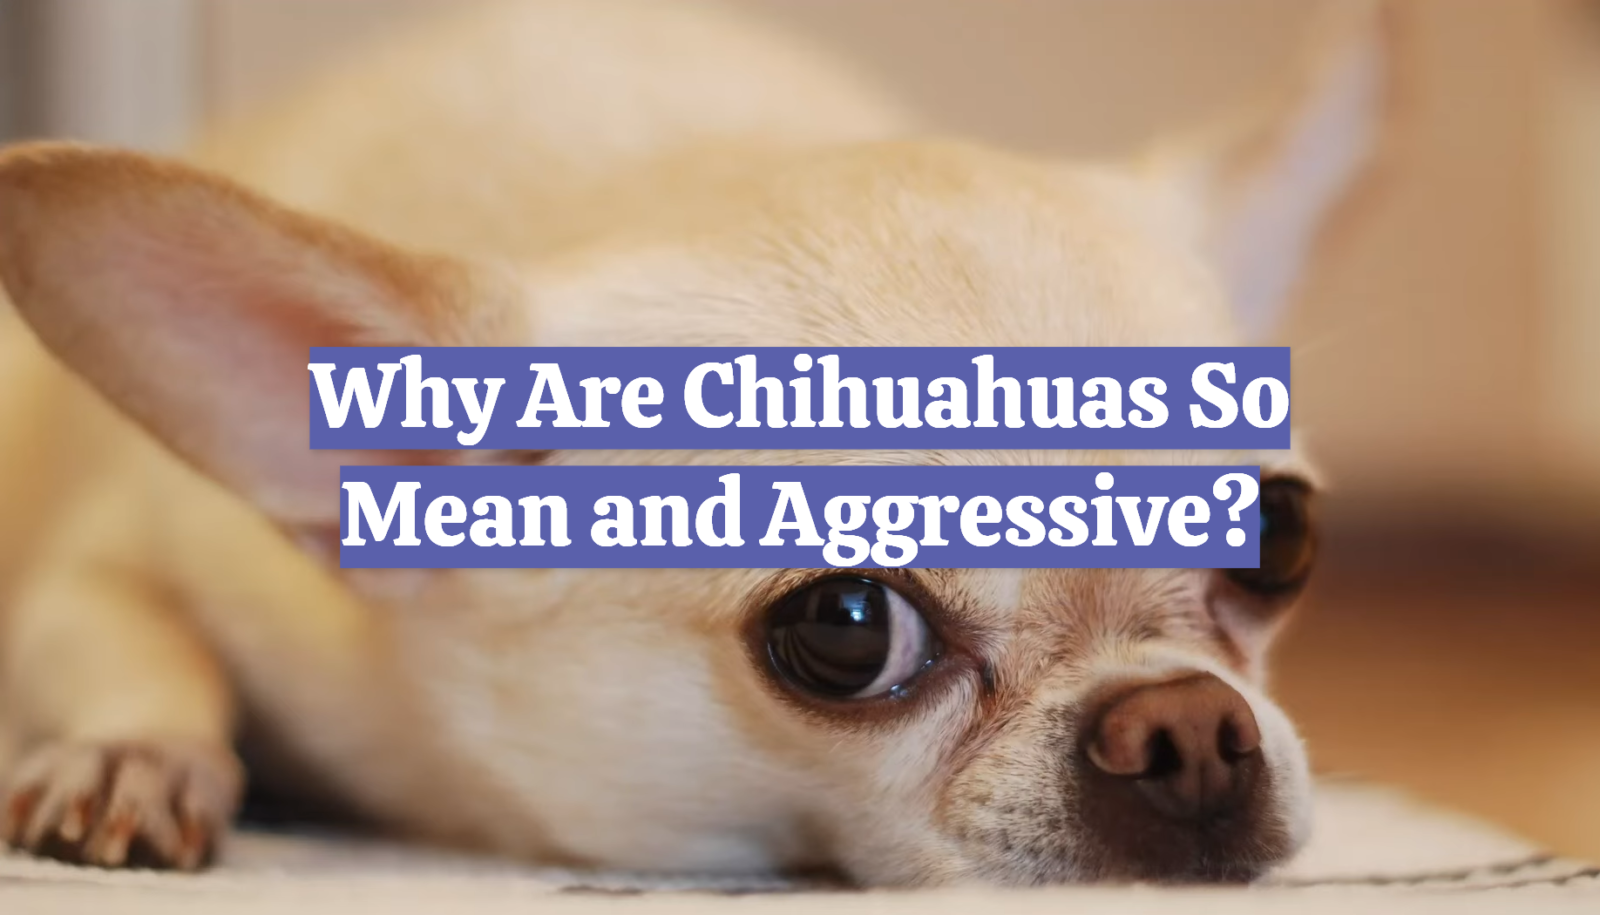 Why Are Chihuahuas So Mean and Aggressive?